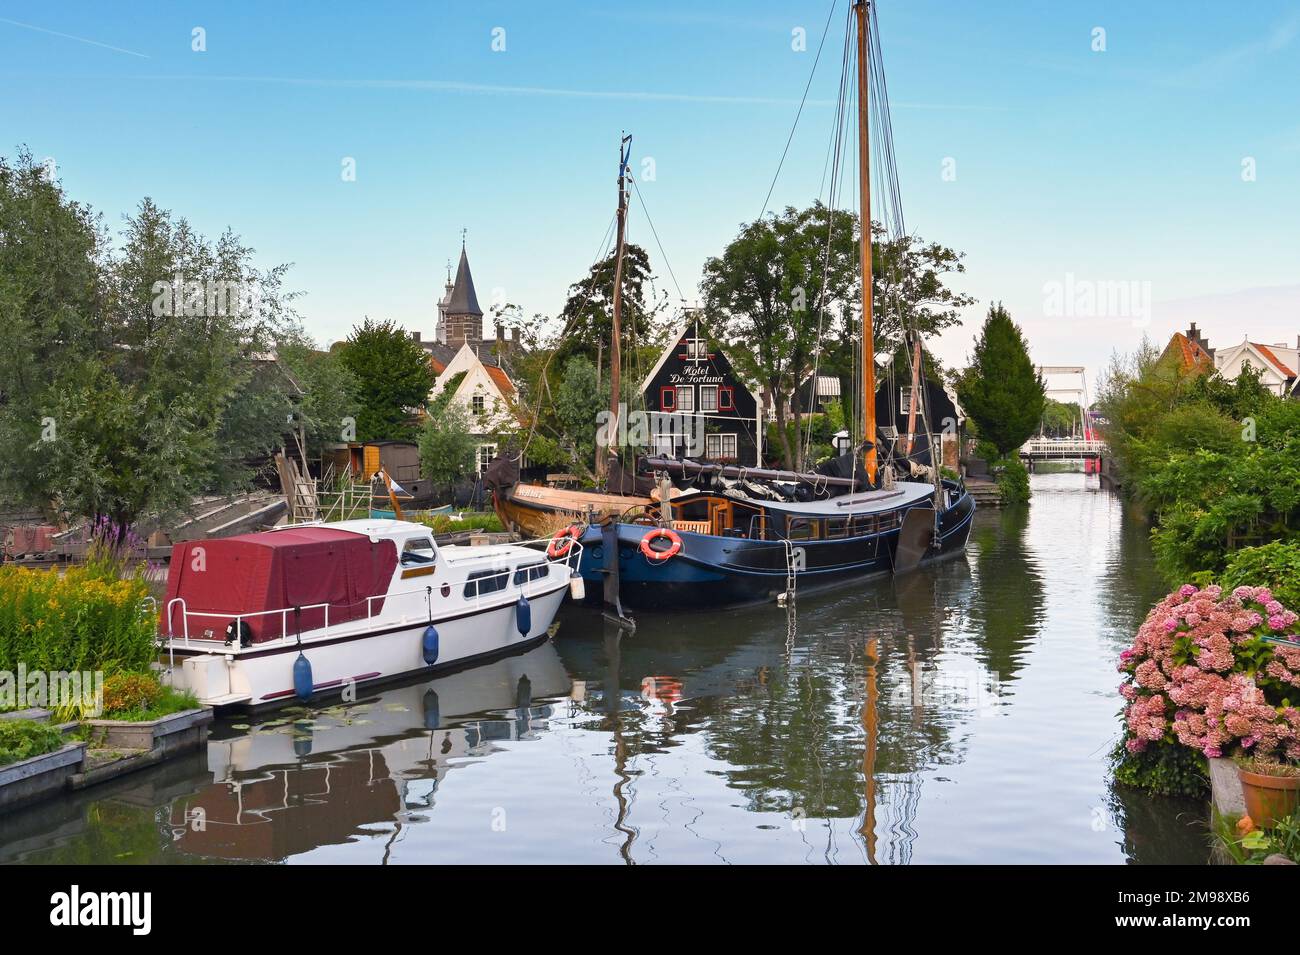 Zaandam, Netherlands - August 2022: Boats moored on one of the canals in the Dutch town of Edam, which is famous for its cheese. Stock Photo